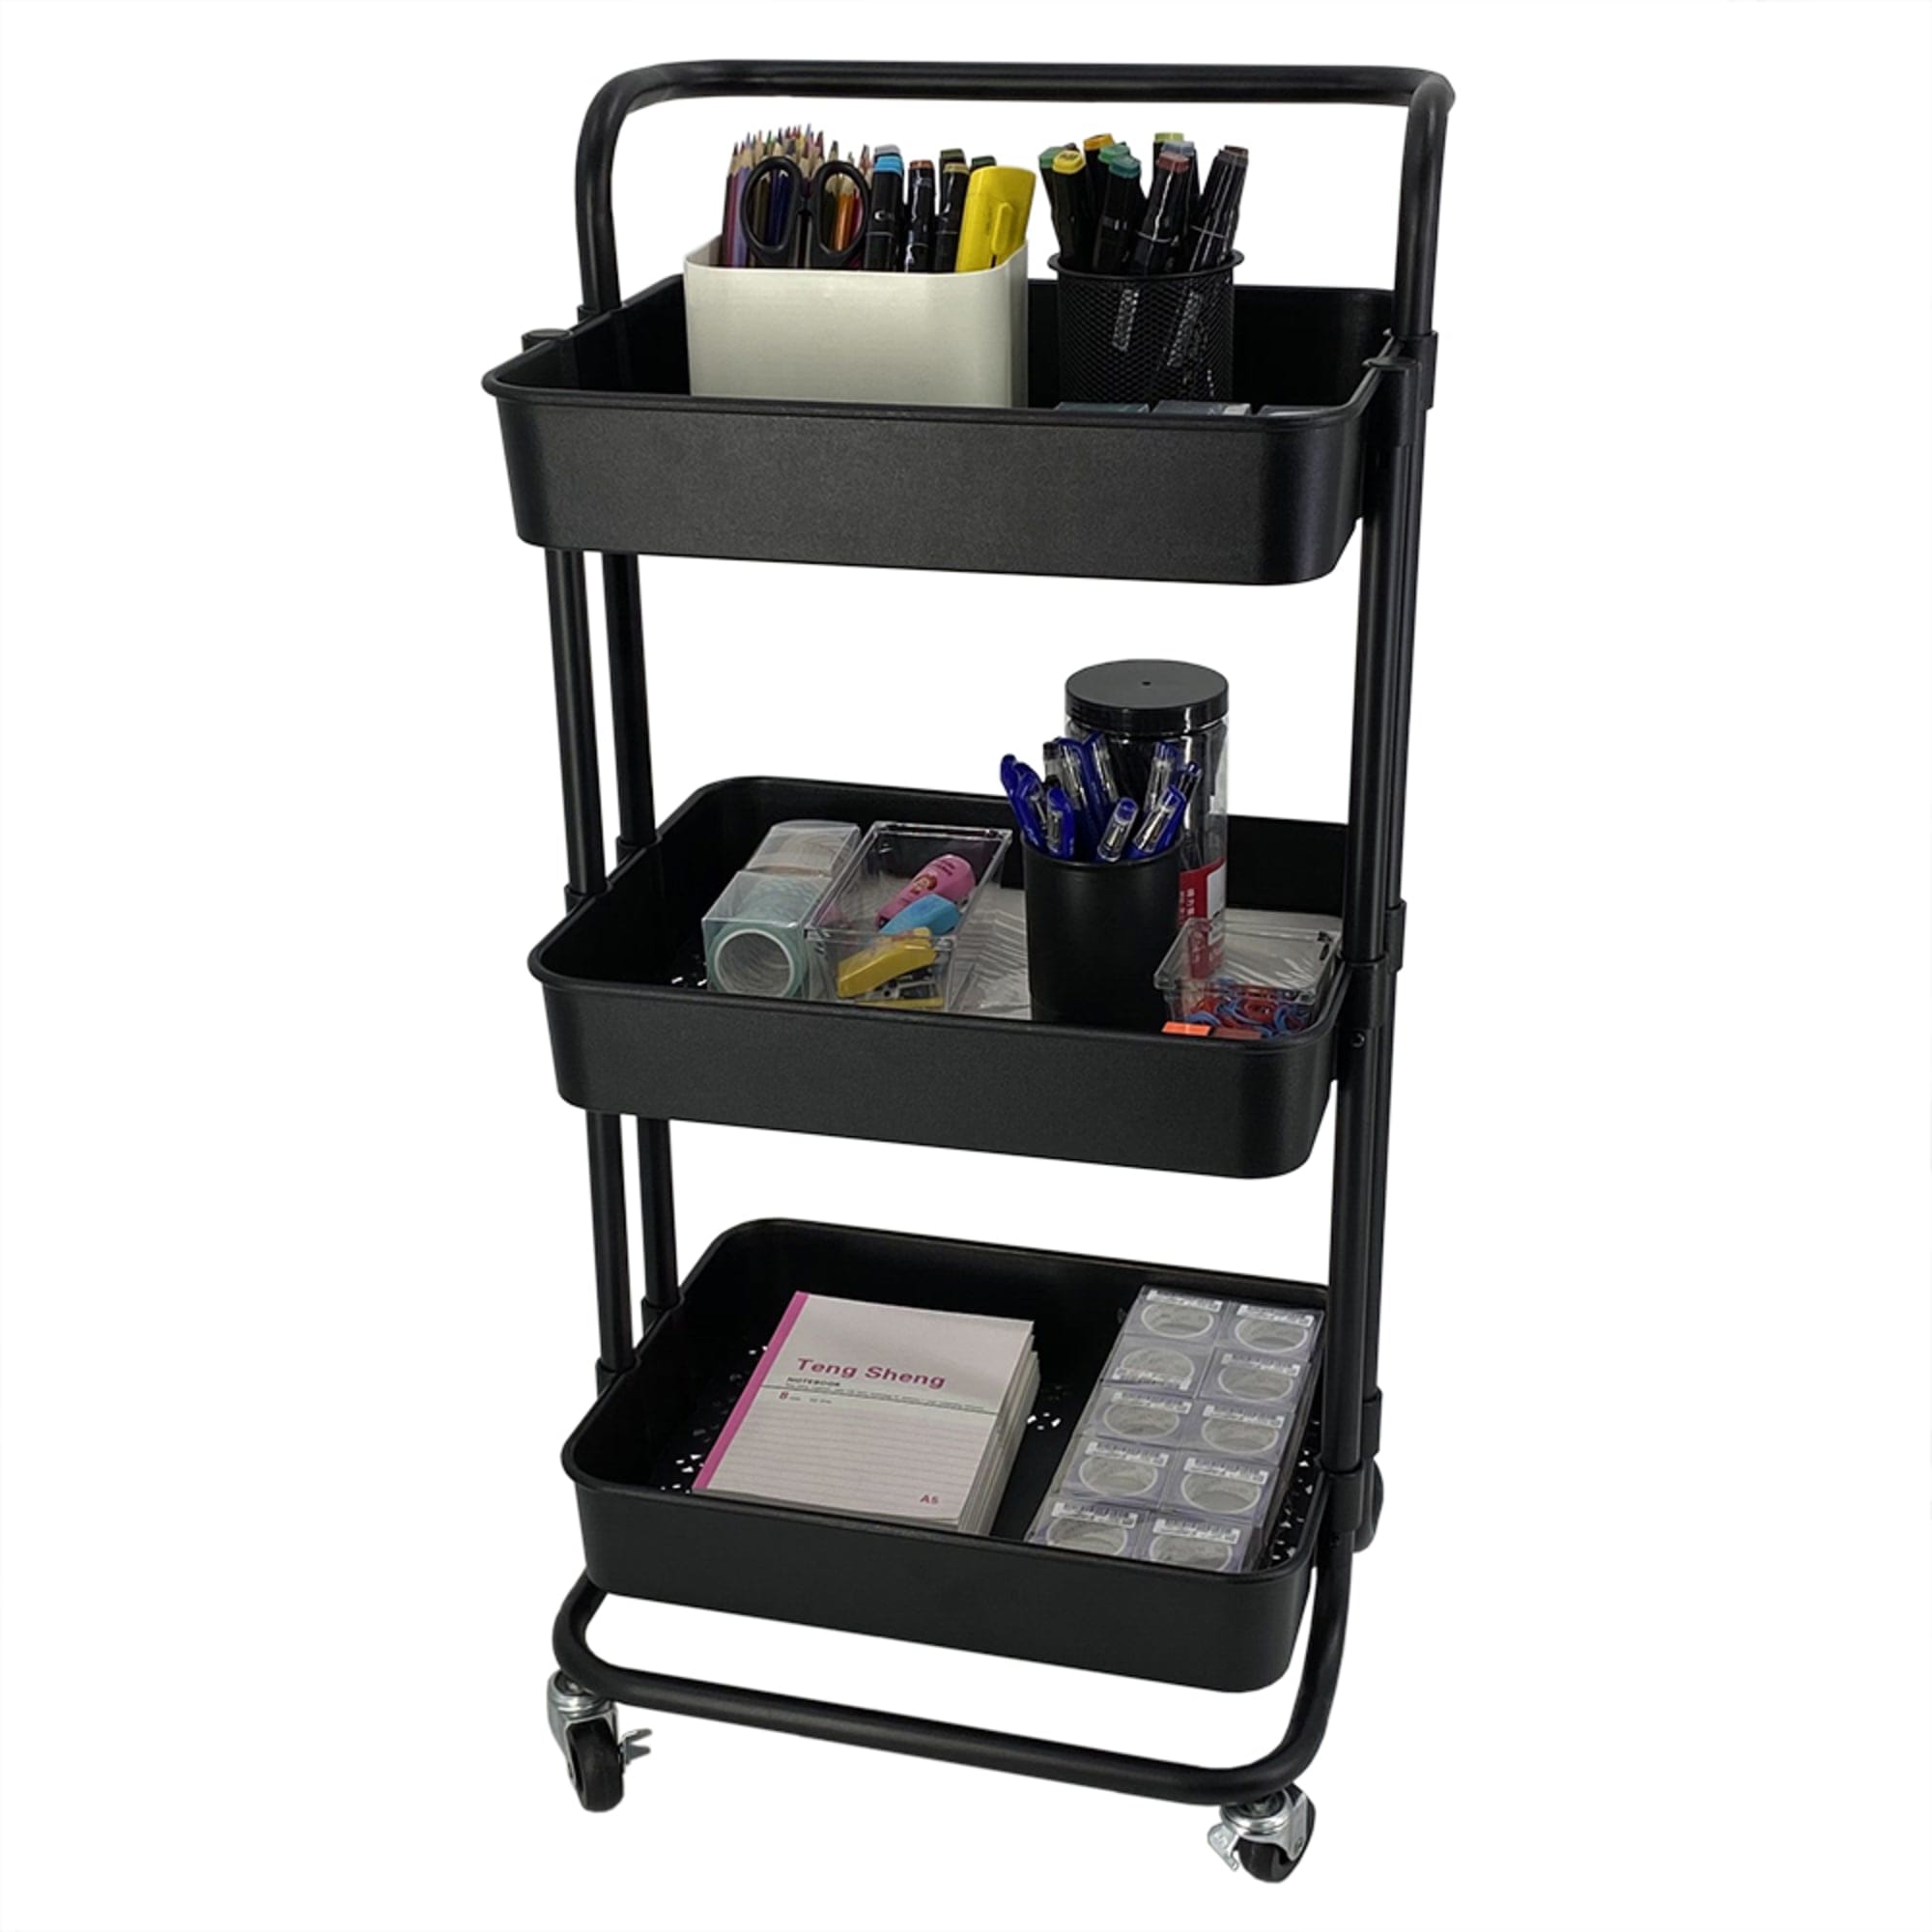 Home Basics 3 Tier Rolling Utility Cart with 2 Locking Wheels, Black $25.00 EACH, CASE PACK OF 3